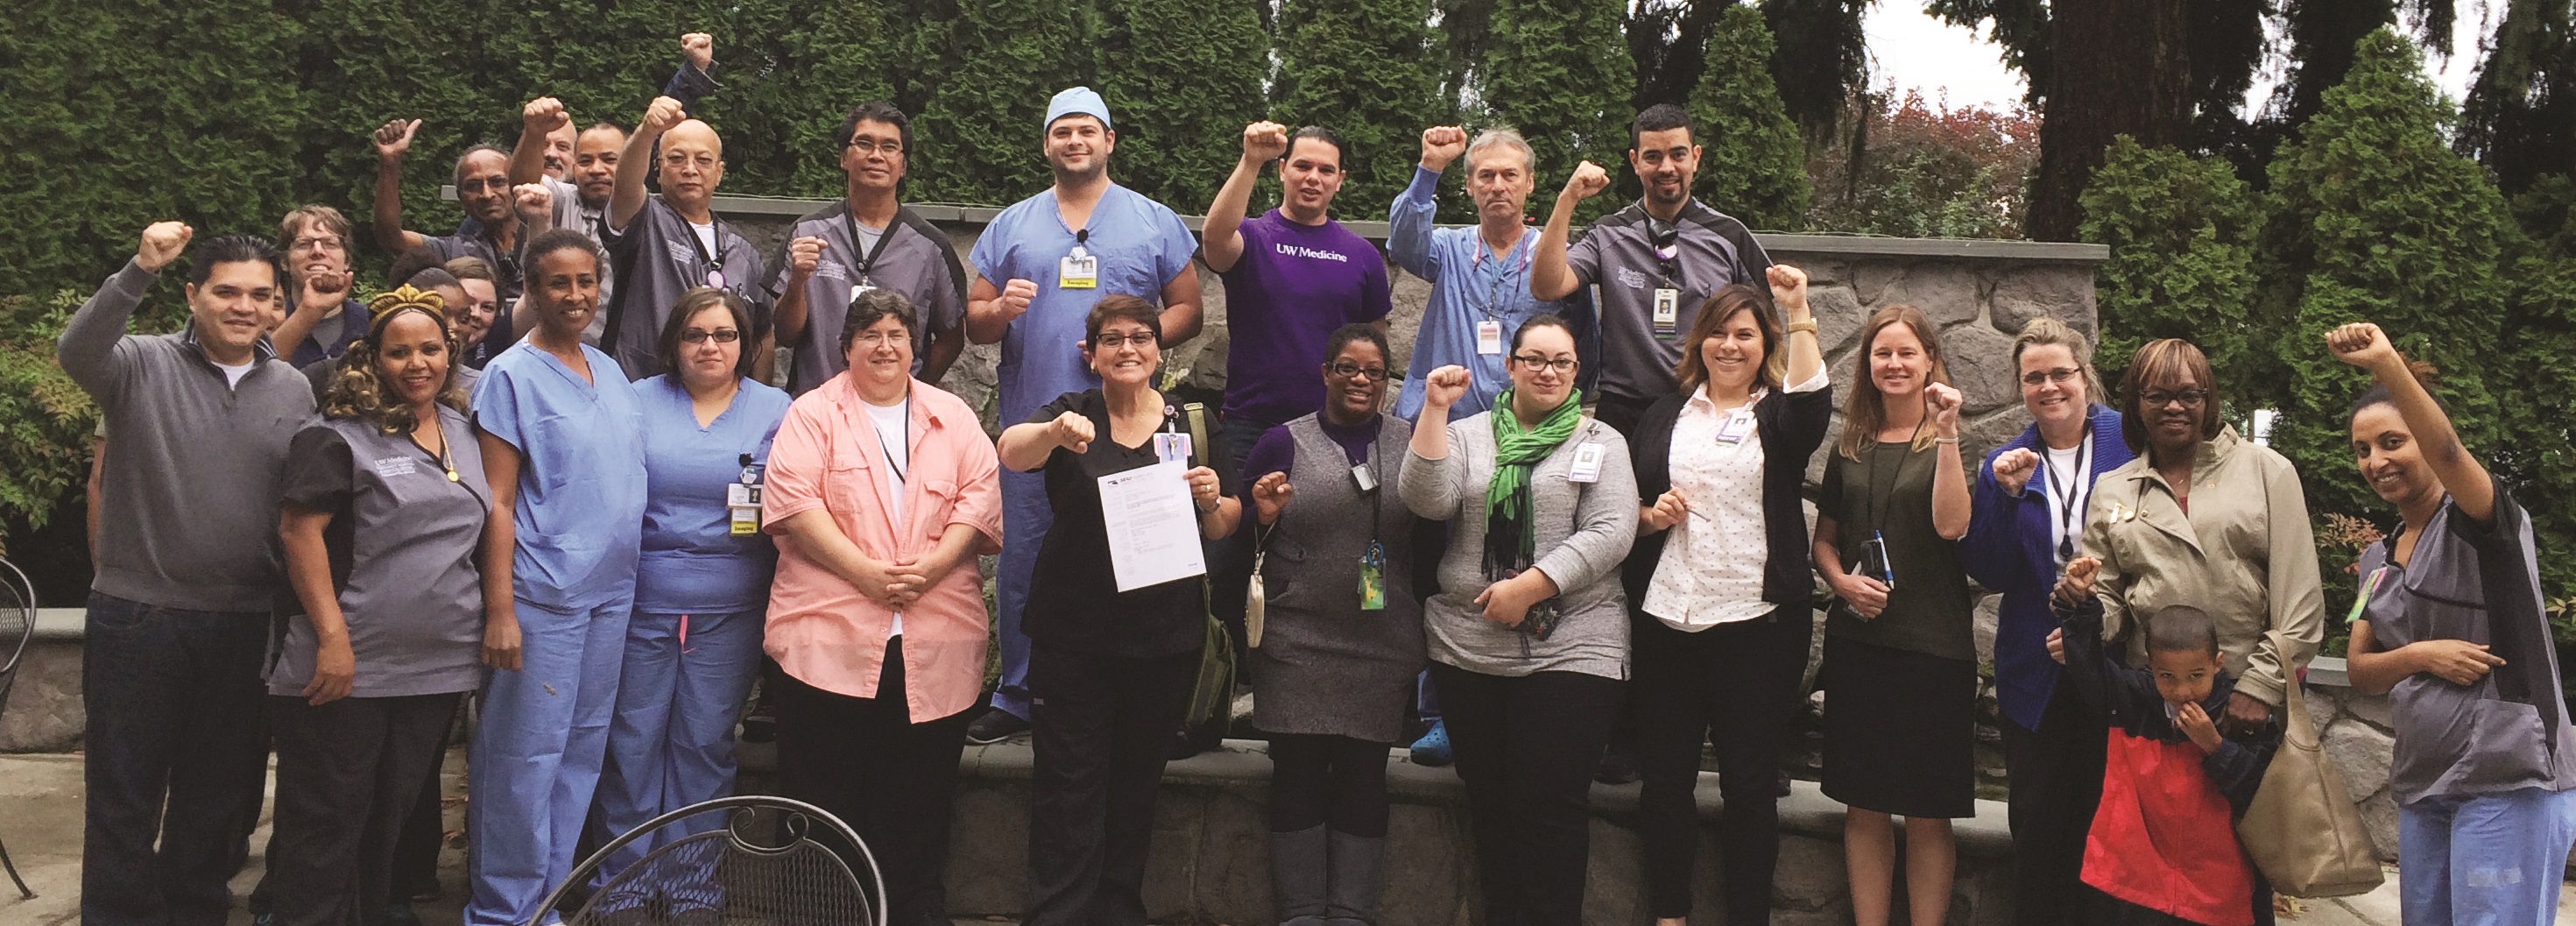 It’s Time for Action at Northwest Hospital: Standing up for patients on October 7